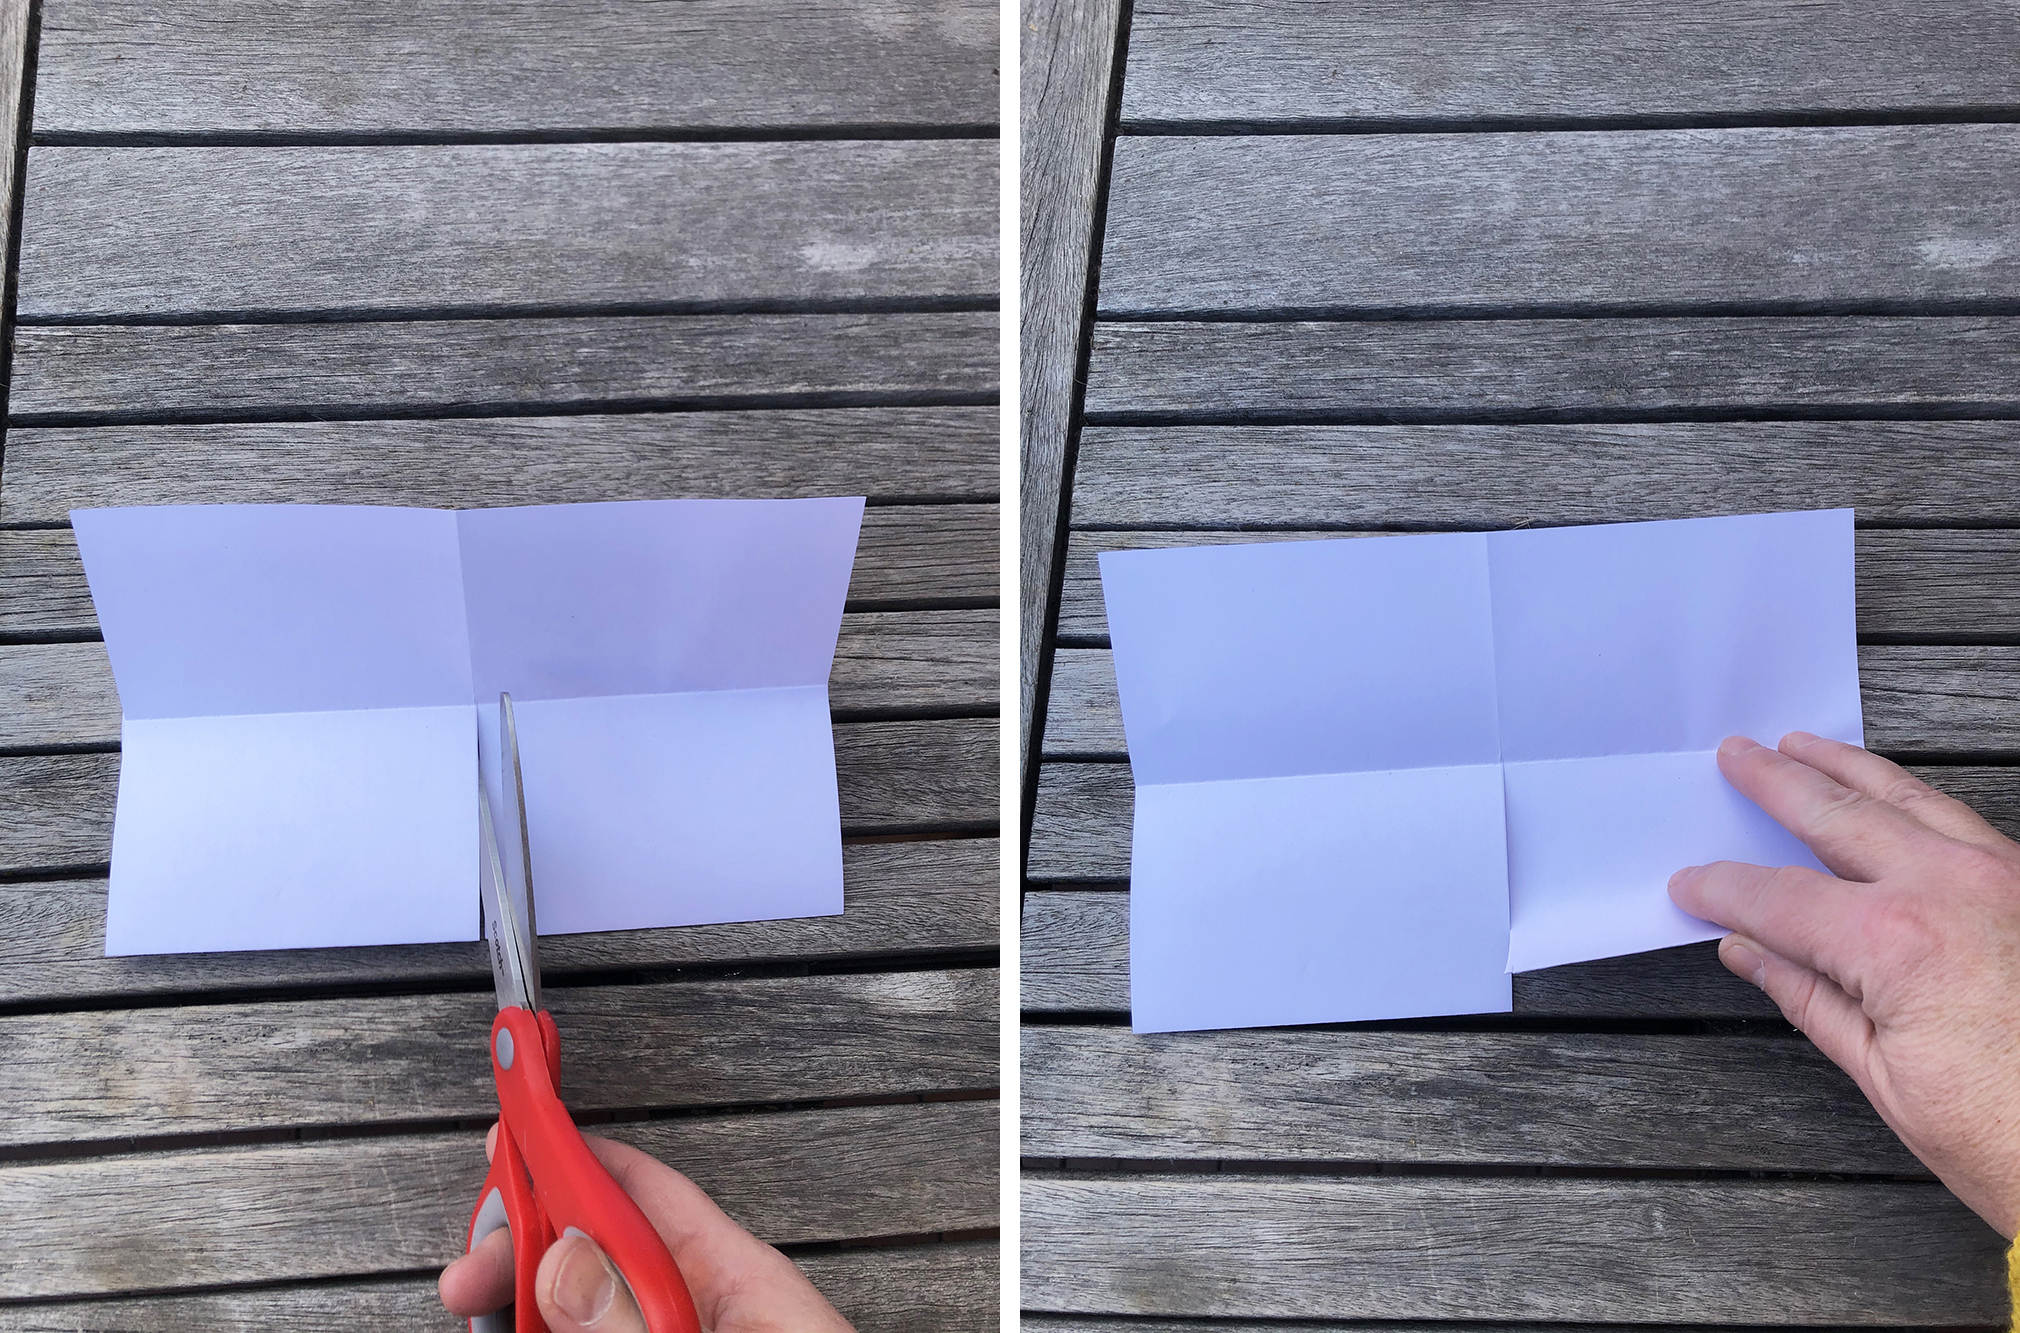 Two images side by side showing scissors cutting on the center crease of folded paper